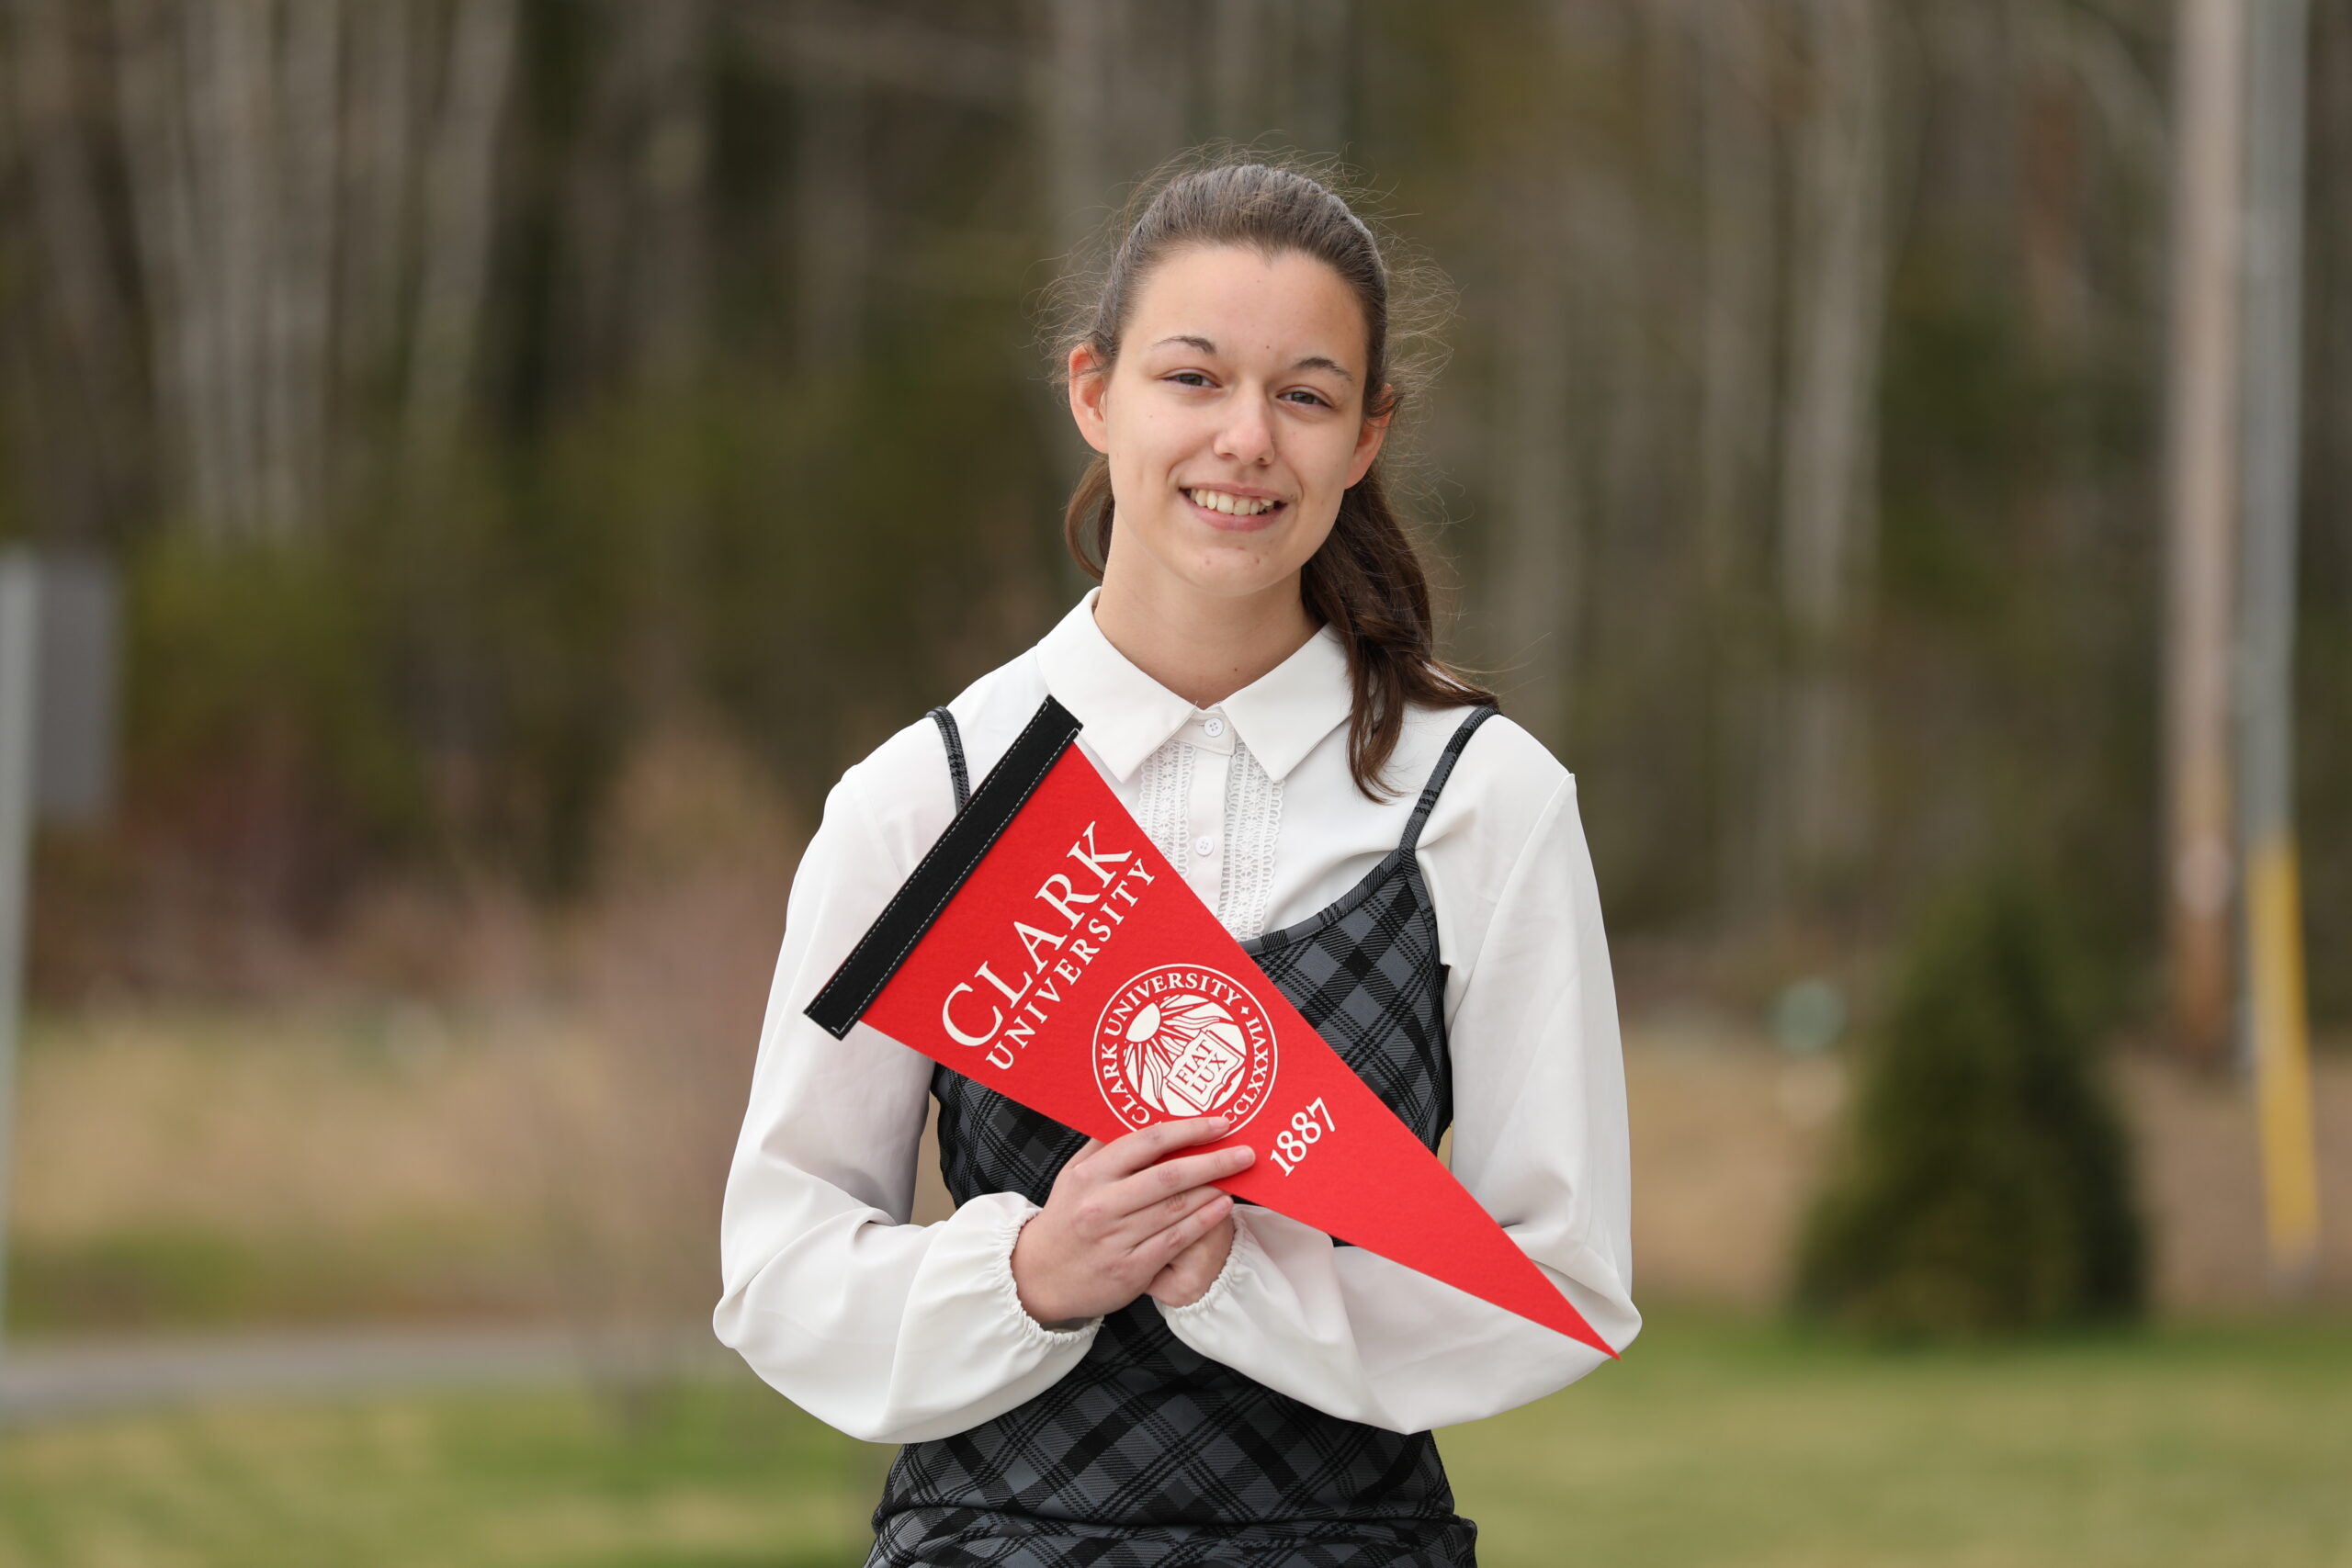 A photo of a young smiling white woman holding a college pennant that says Clark University 1887